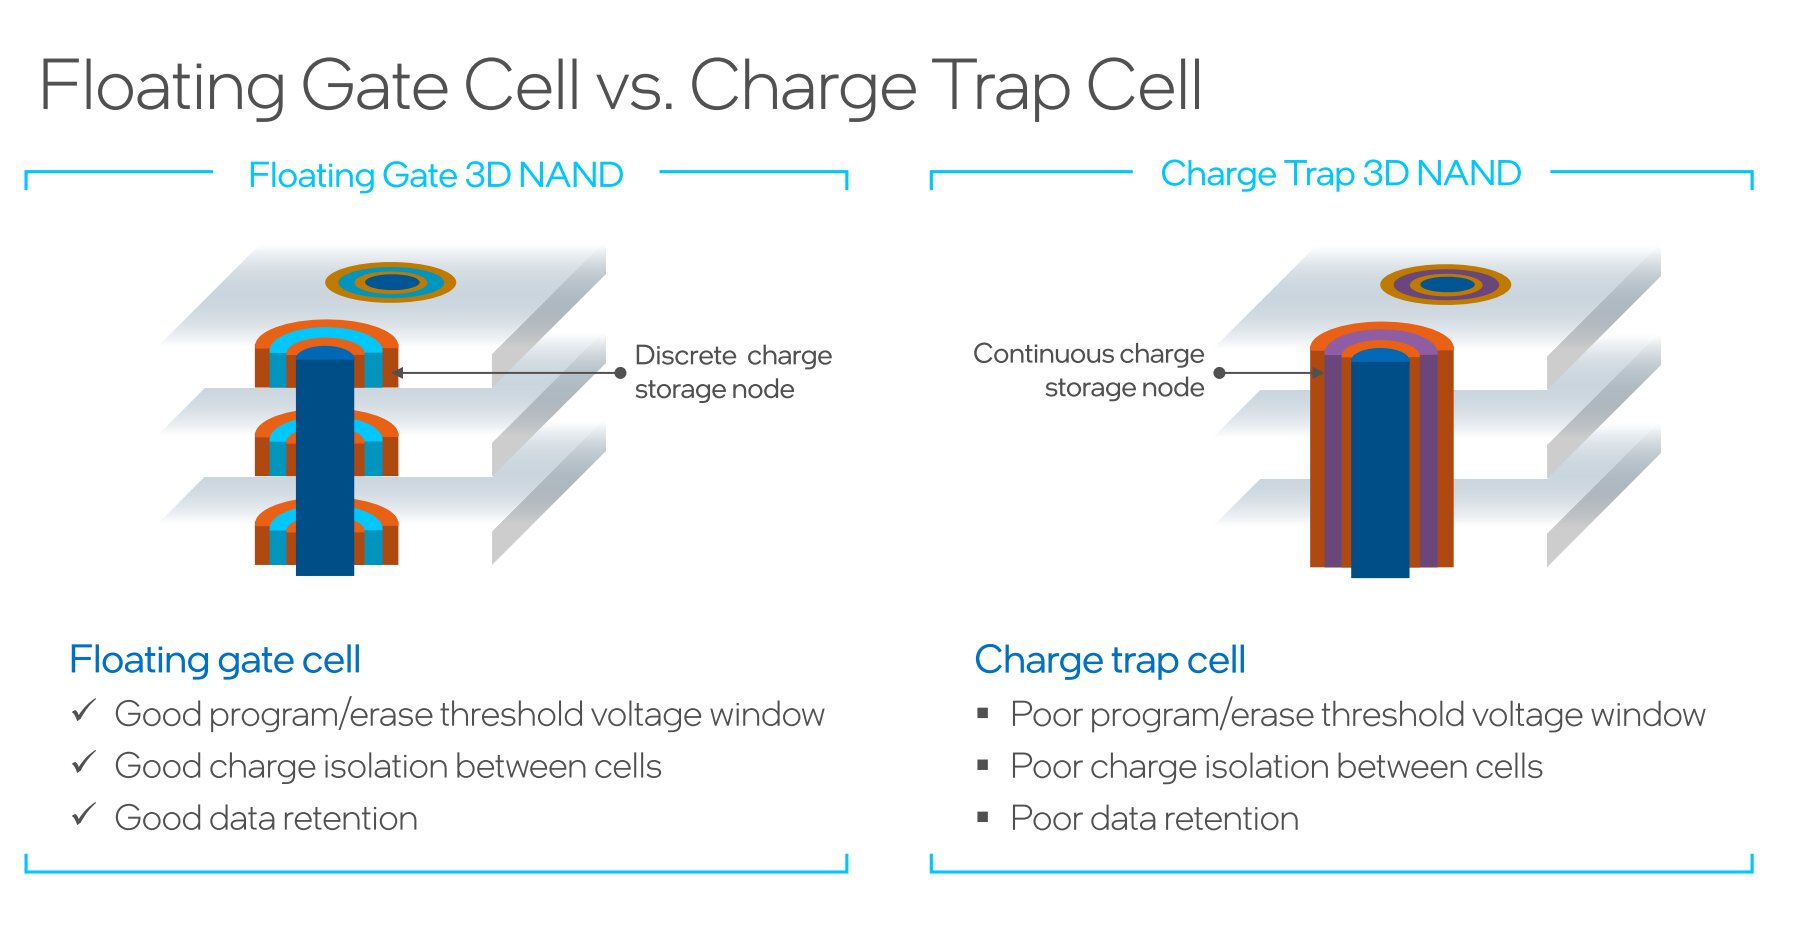 Floating Gate Cell vs. Charge Trap Cell